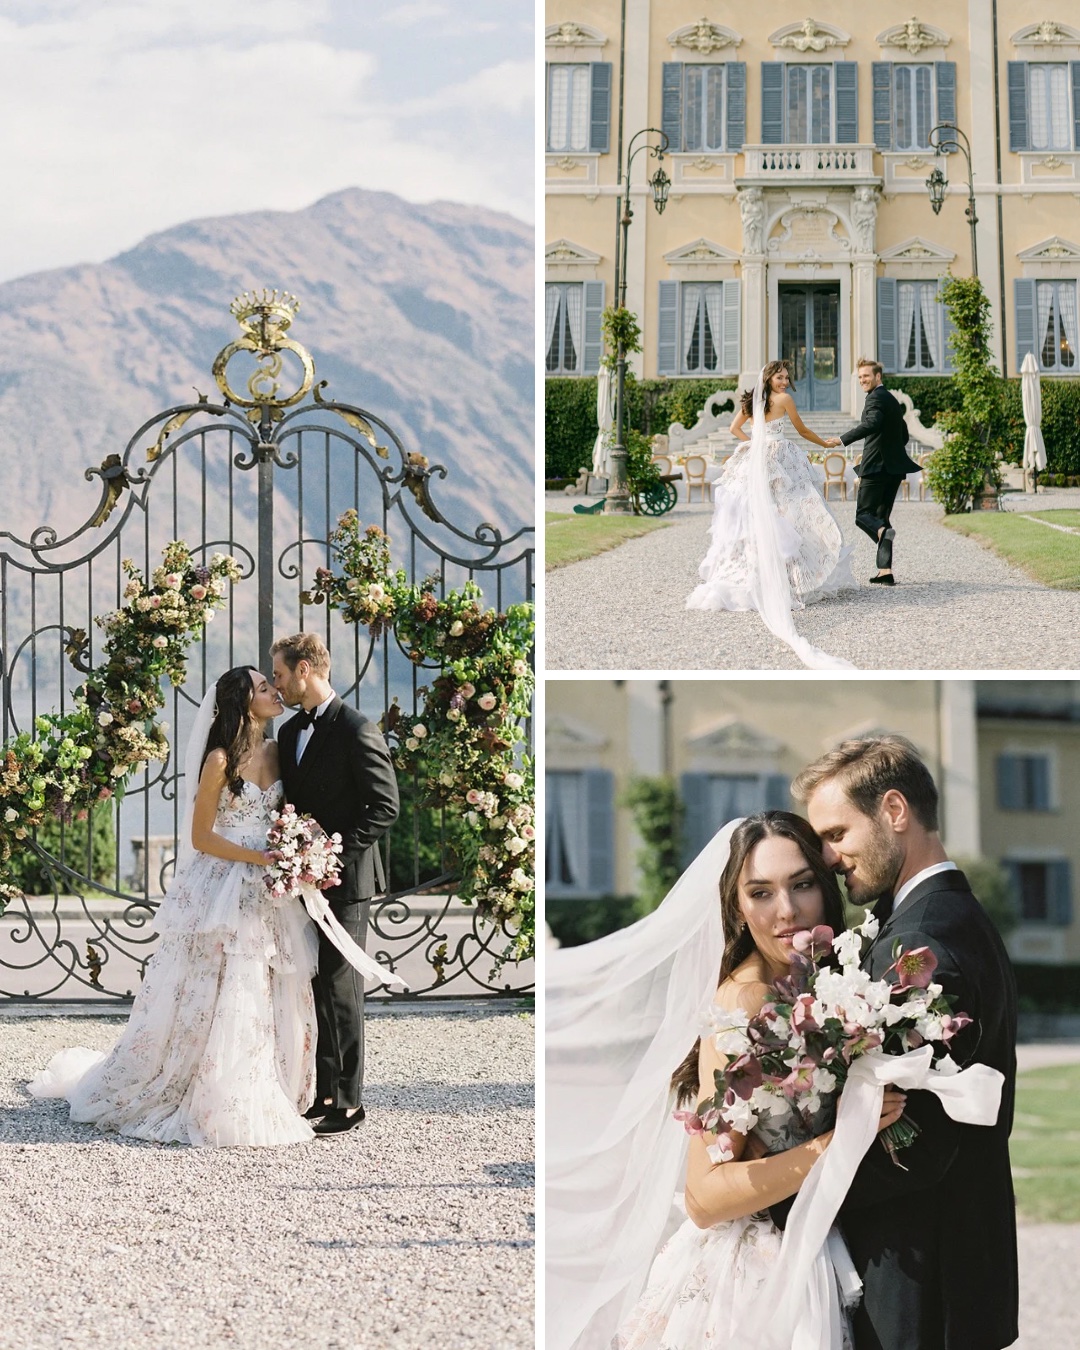 Collage of photos of a bride and groom posing at a fairytale wedding venue